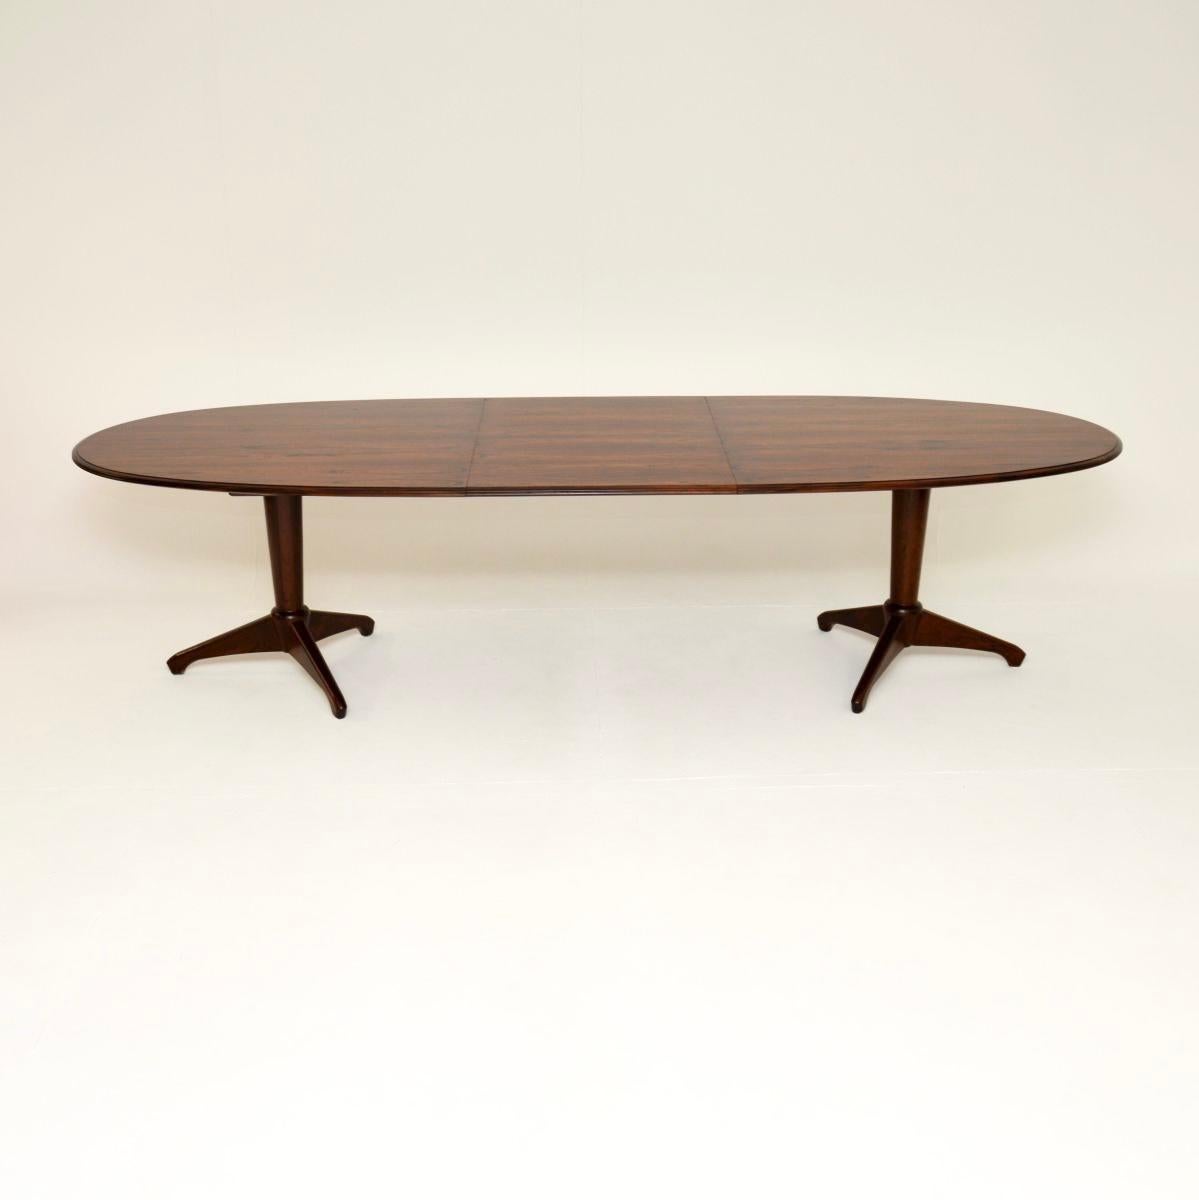 British Vintage Extending Dining Table by Andrew Milne for Heal’s For Sale